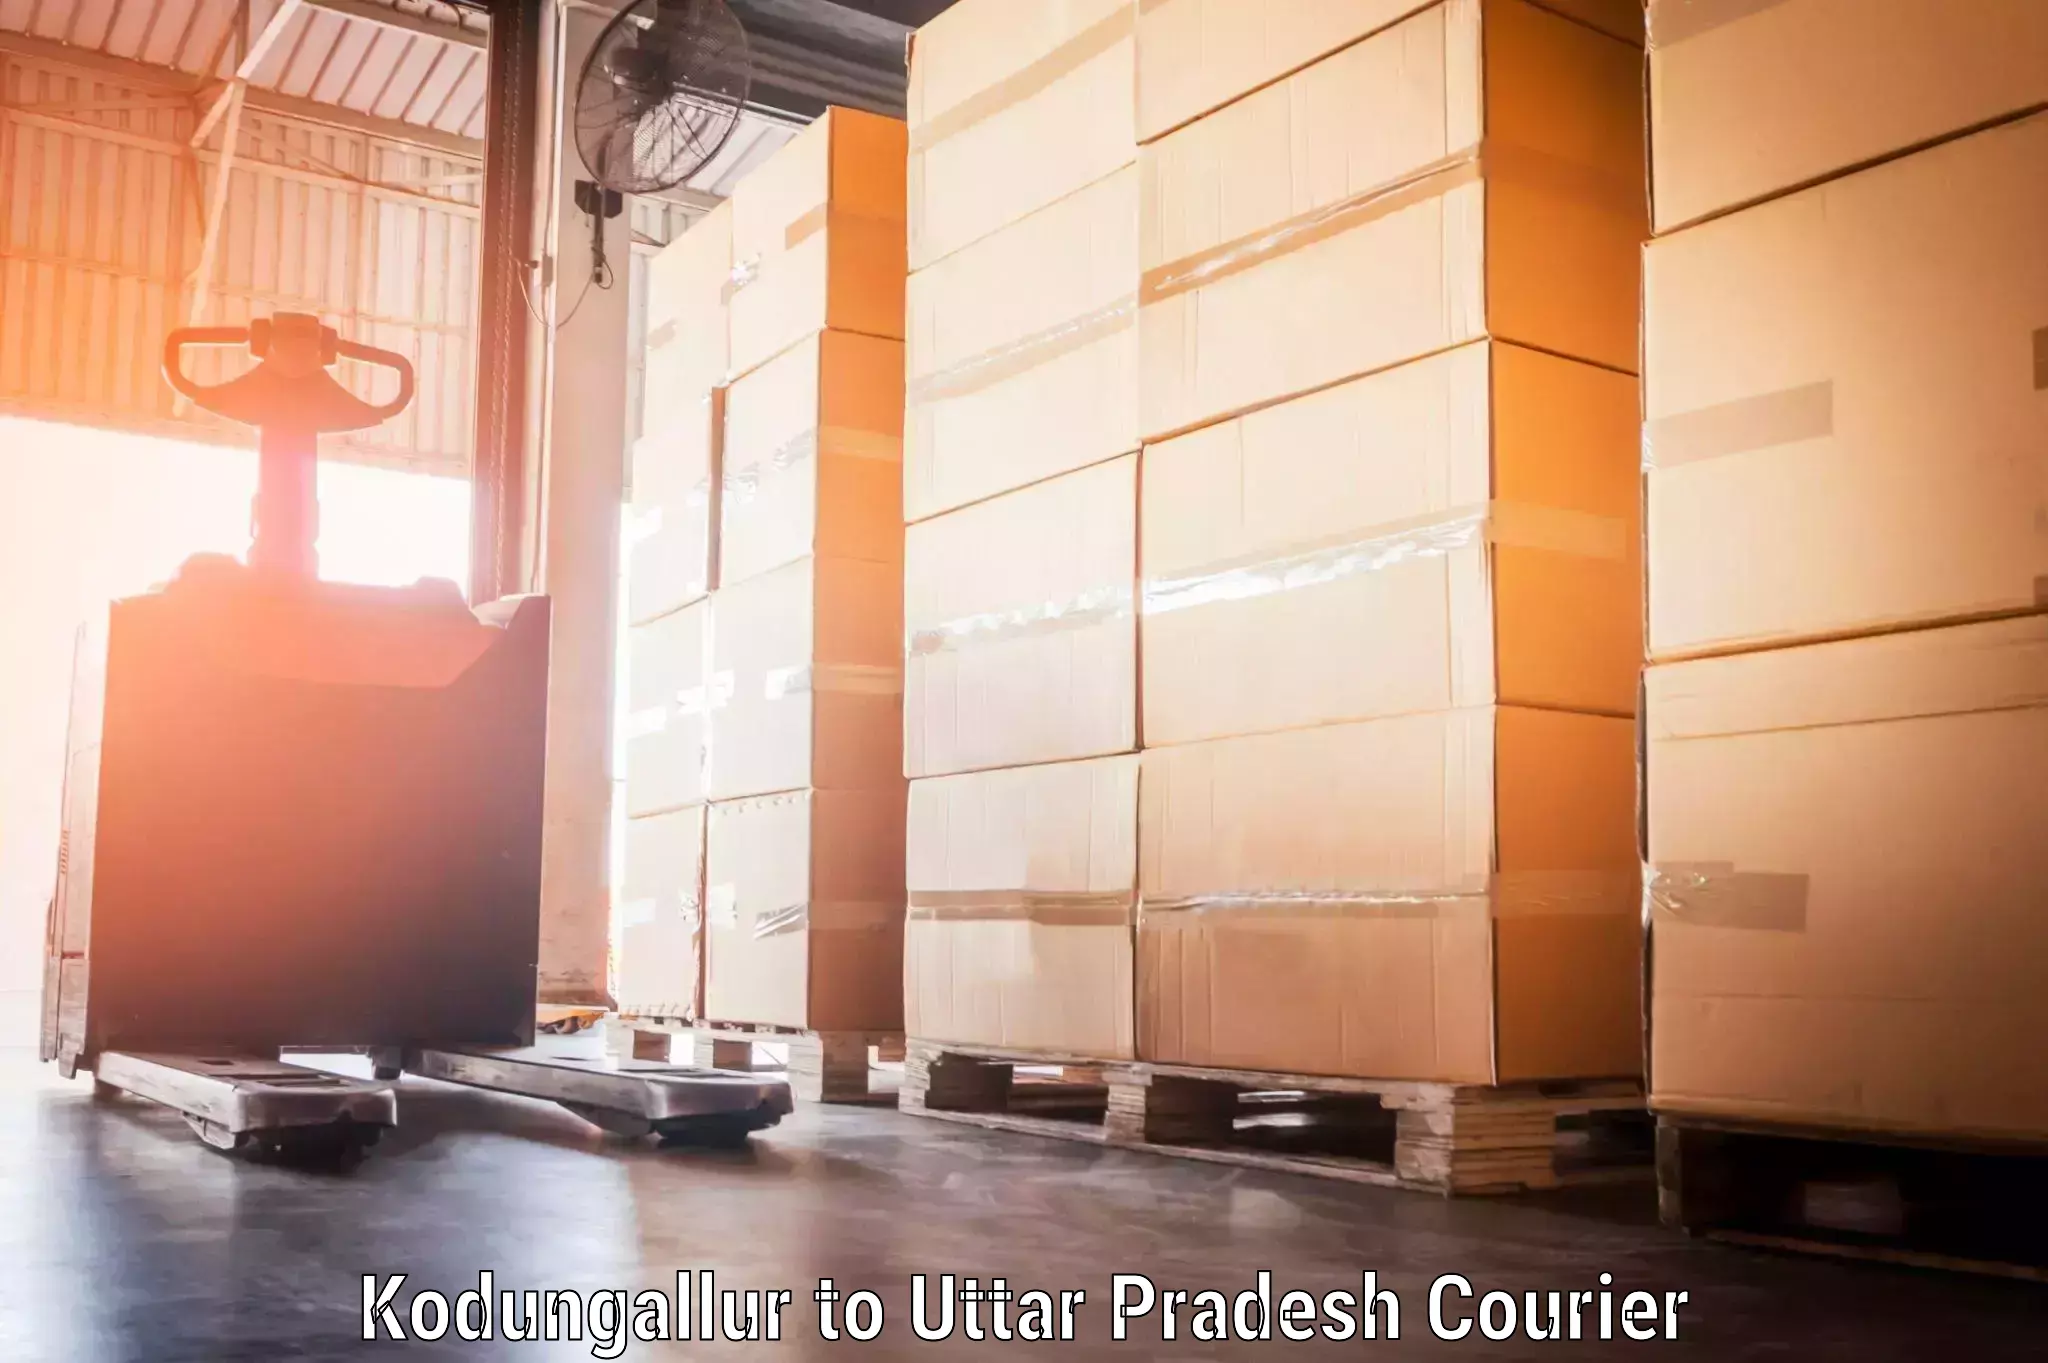 Baggage shipping experience in Kodungallur to Ayodhya